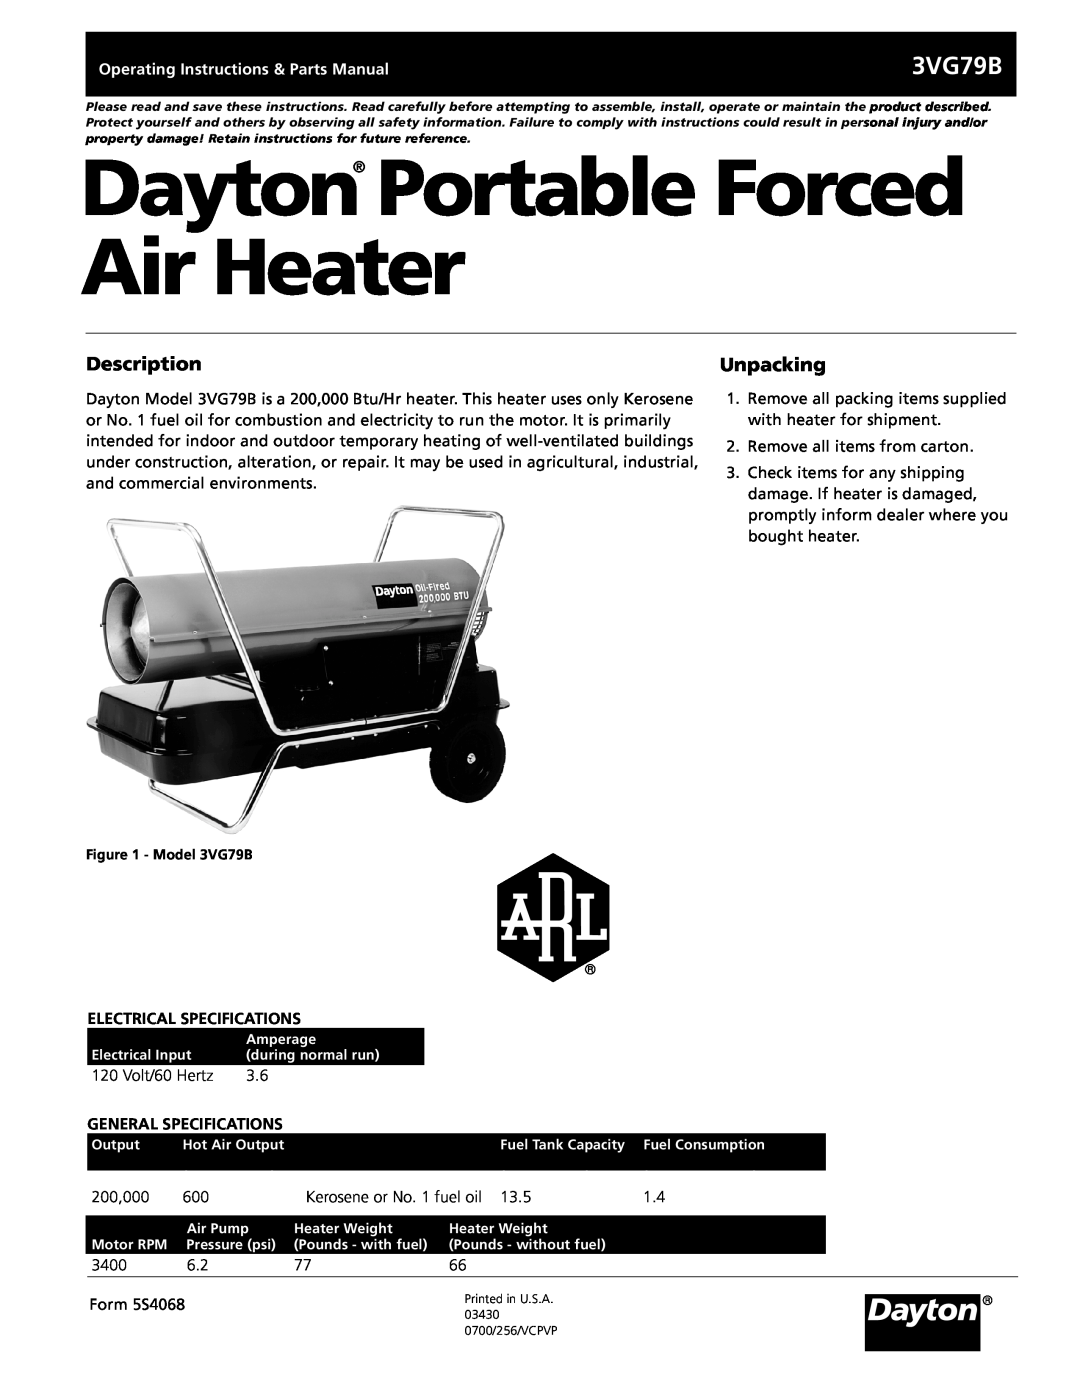 Dayton 3VG79B operating instructions Dayton Portable Forced Air Heater, Description, Unpacking, Electrical Specifications 